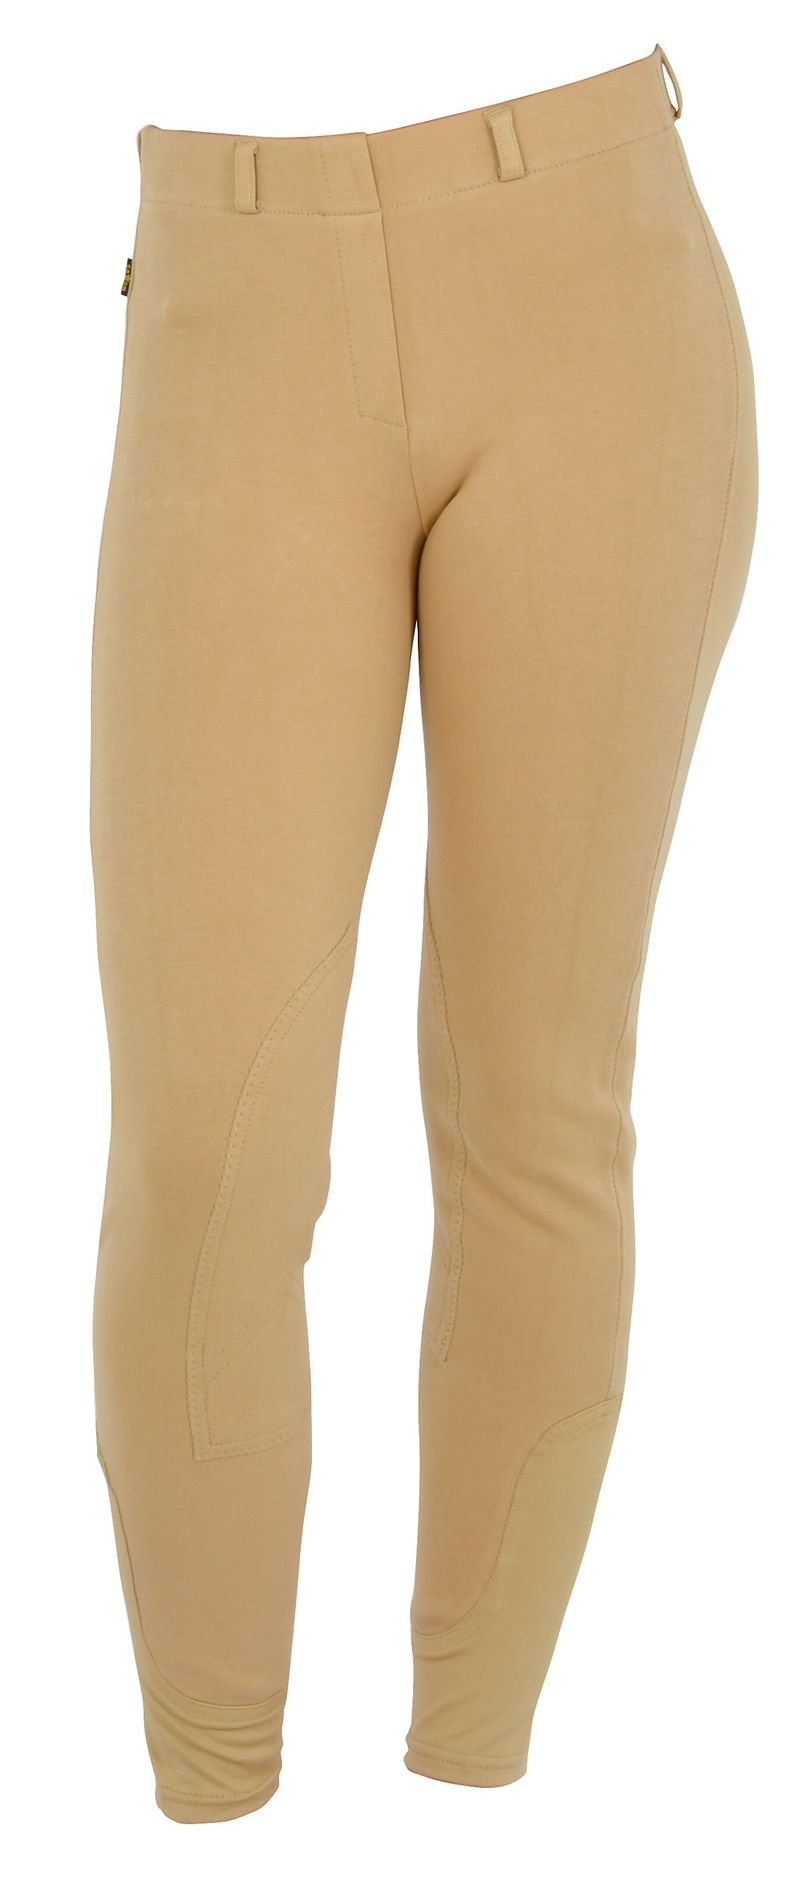 Saxon-Knee-Patch-Women-s-Pull-On-Breeches